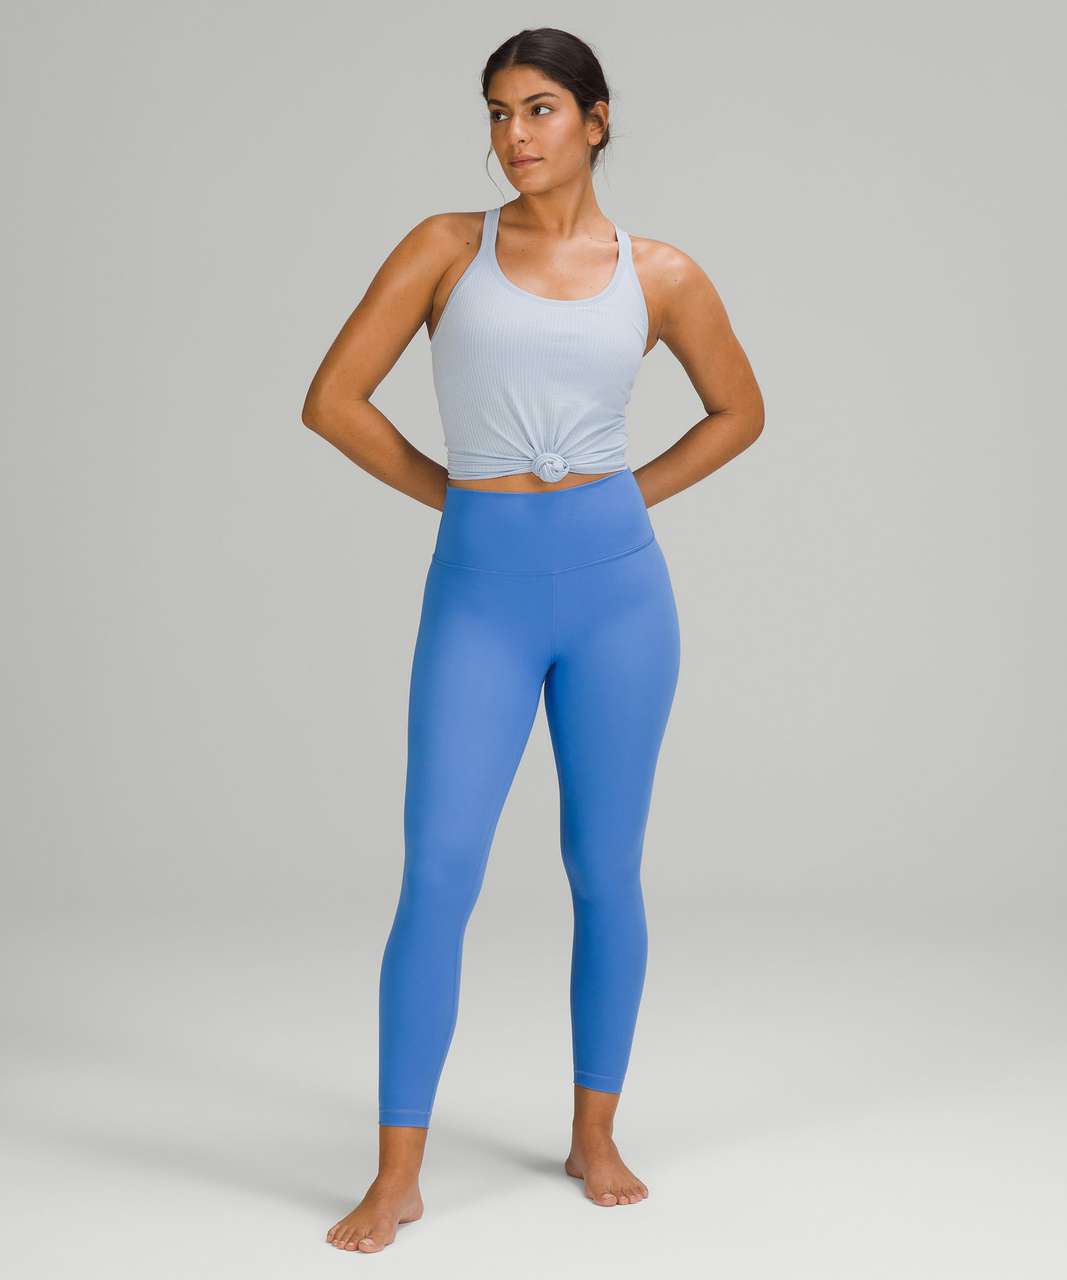 Fast and Free High-Rise Tight 25, Blue Nile